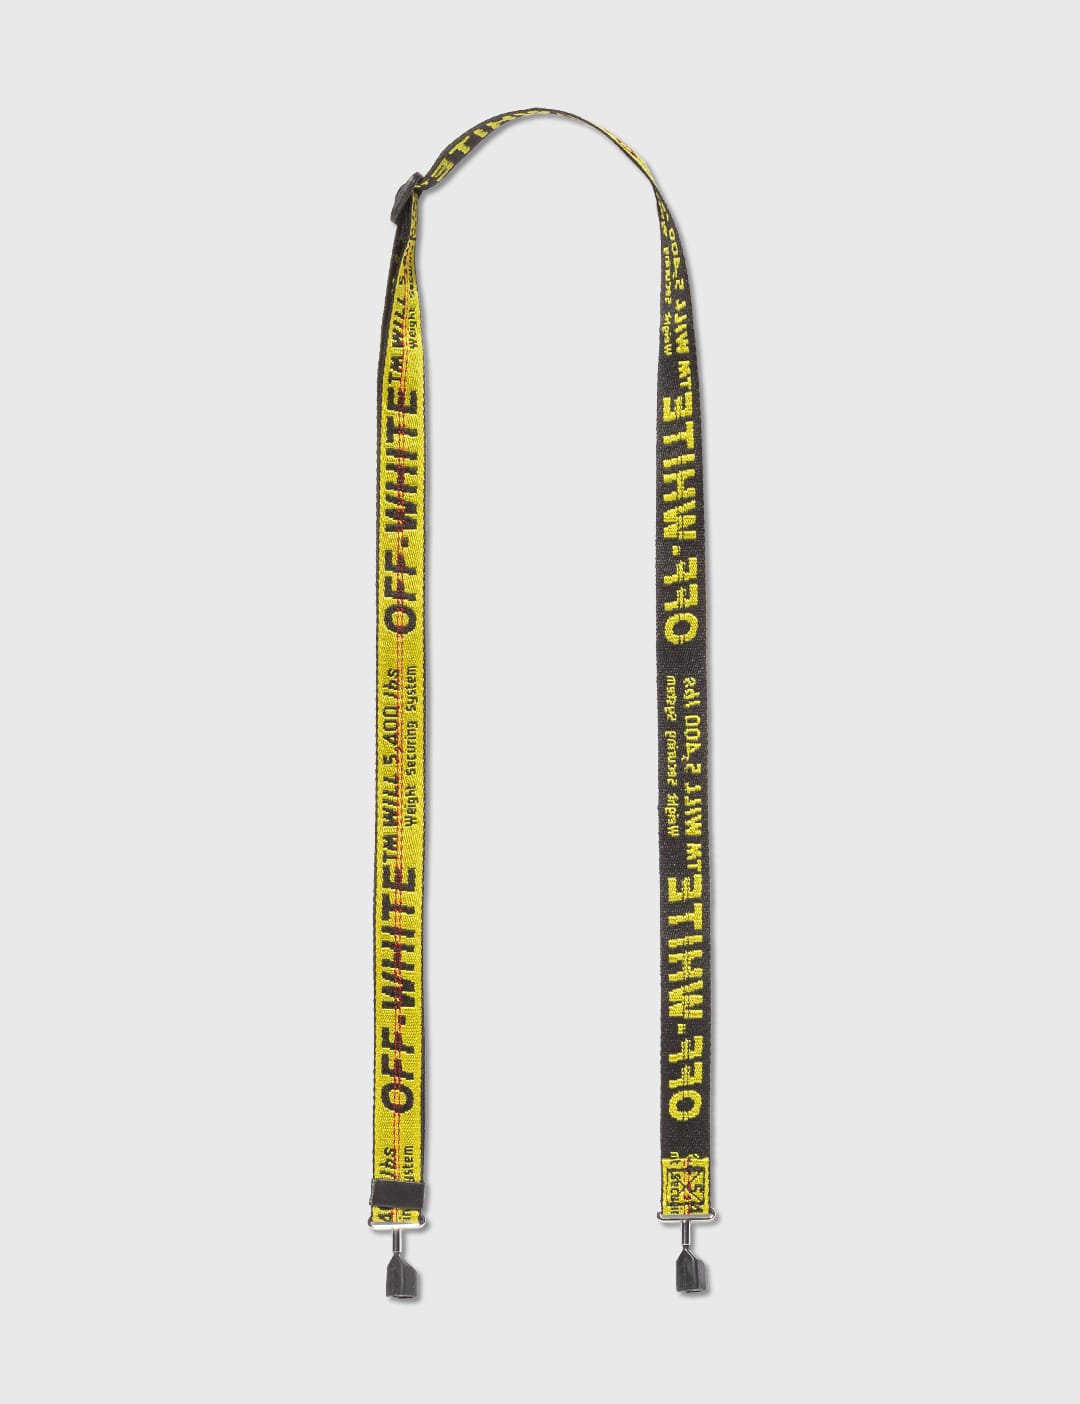 Shop Luxury Off-White Yellow Industrial Logo Shoulder Strap | Ounass UAE |  Yellow white, Shoulder strap, Industry logo